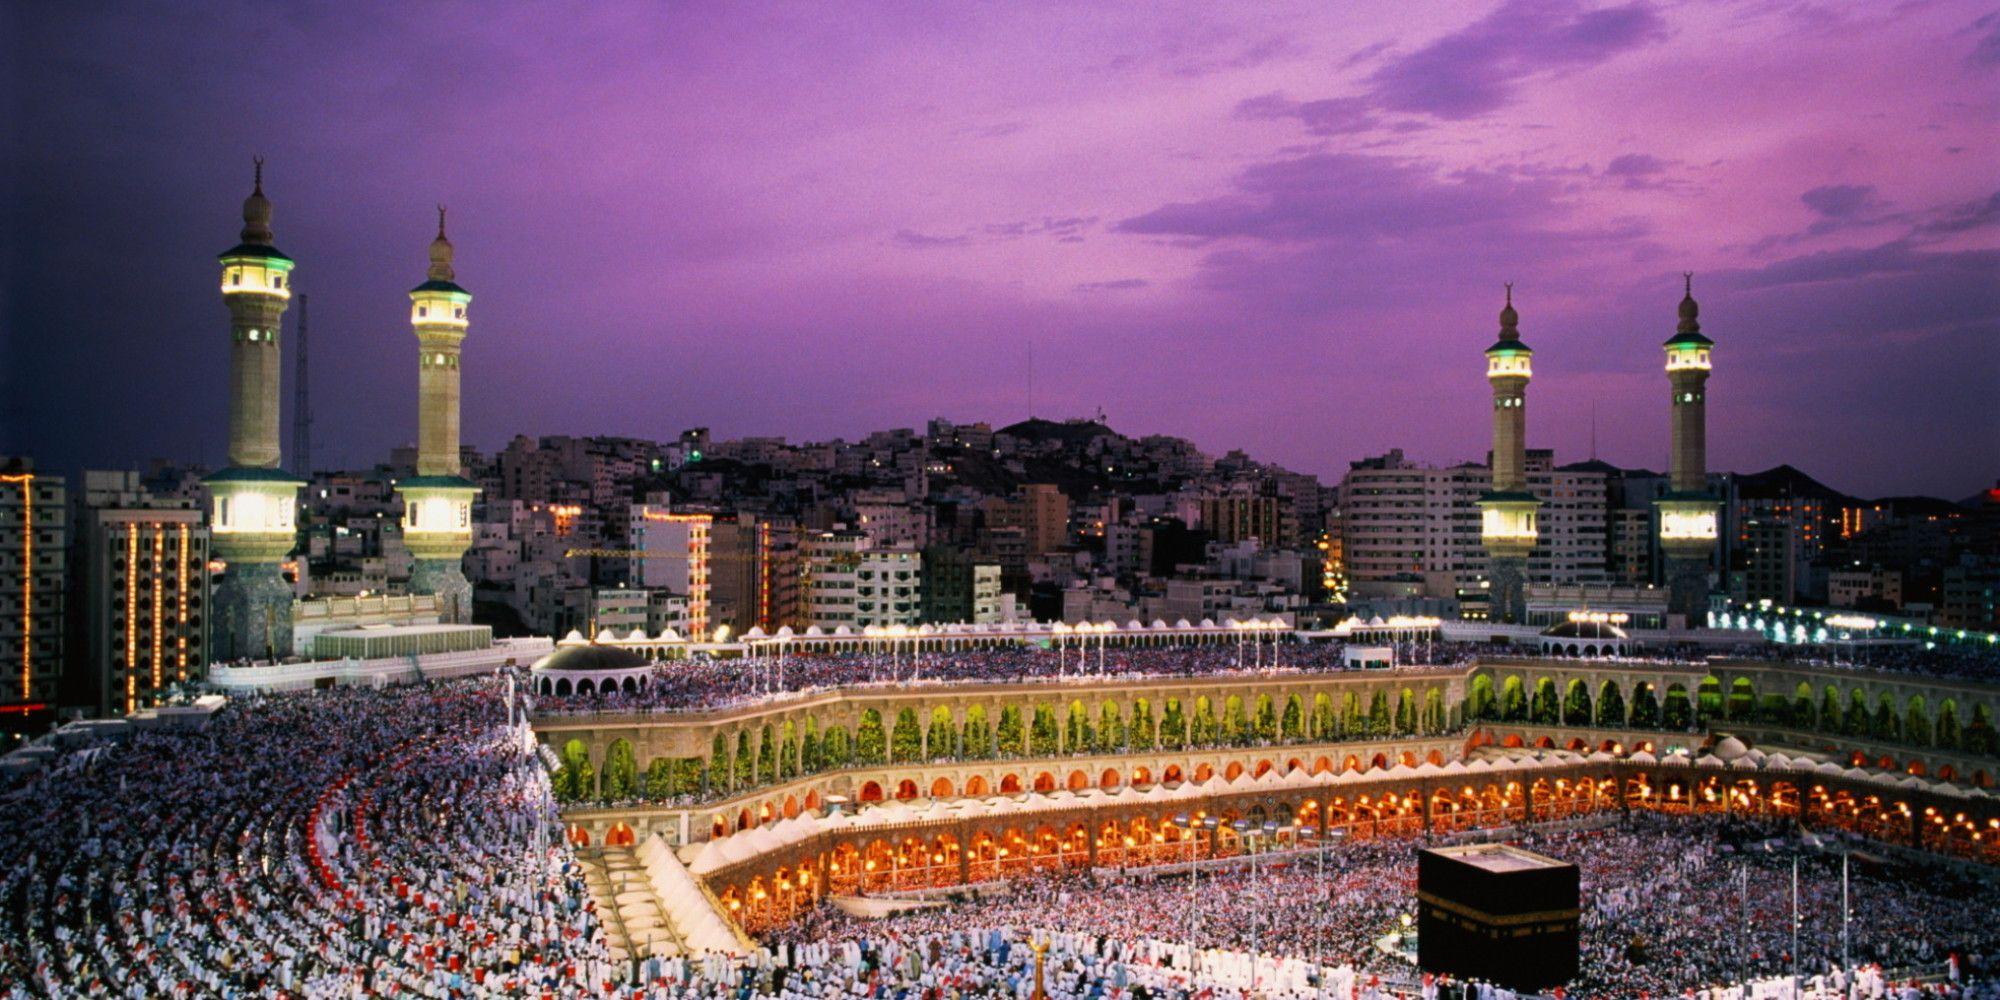 Hajj Islam's Pilgrimage To Mecca: Facts, History And Dates Of